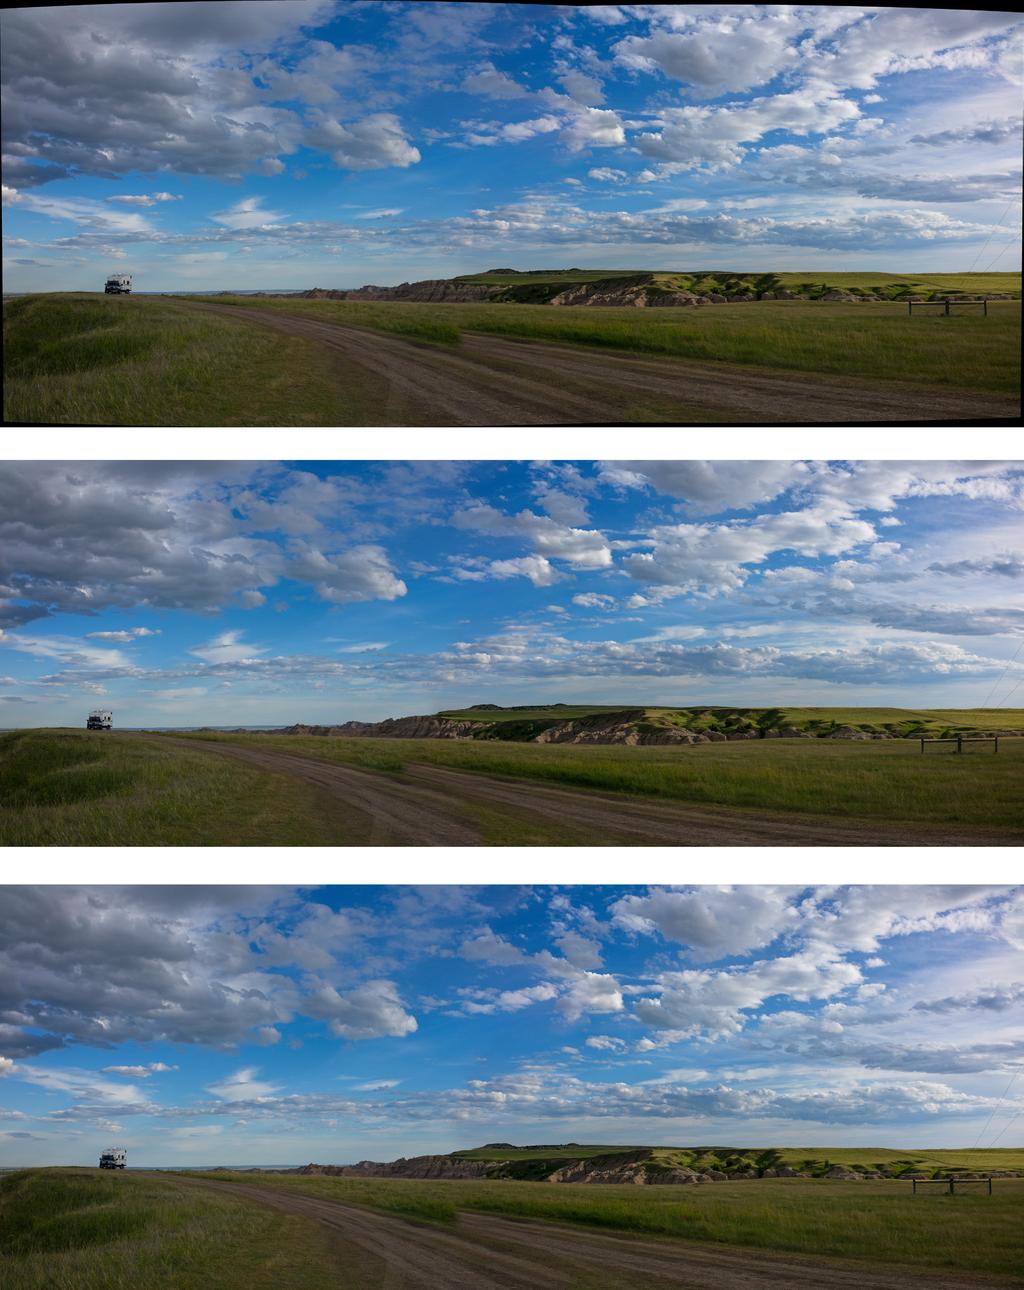 These panoramas demonstrate the three different edge options available via the Create Panorama feature. The top panorama was set to None, the middle to Crop, and the bottom the Warp to Fill.